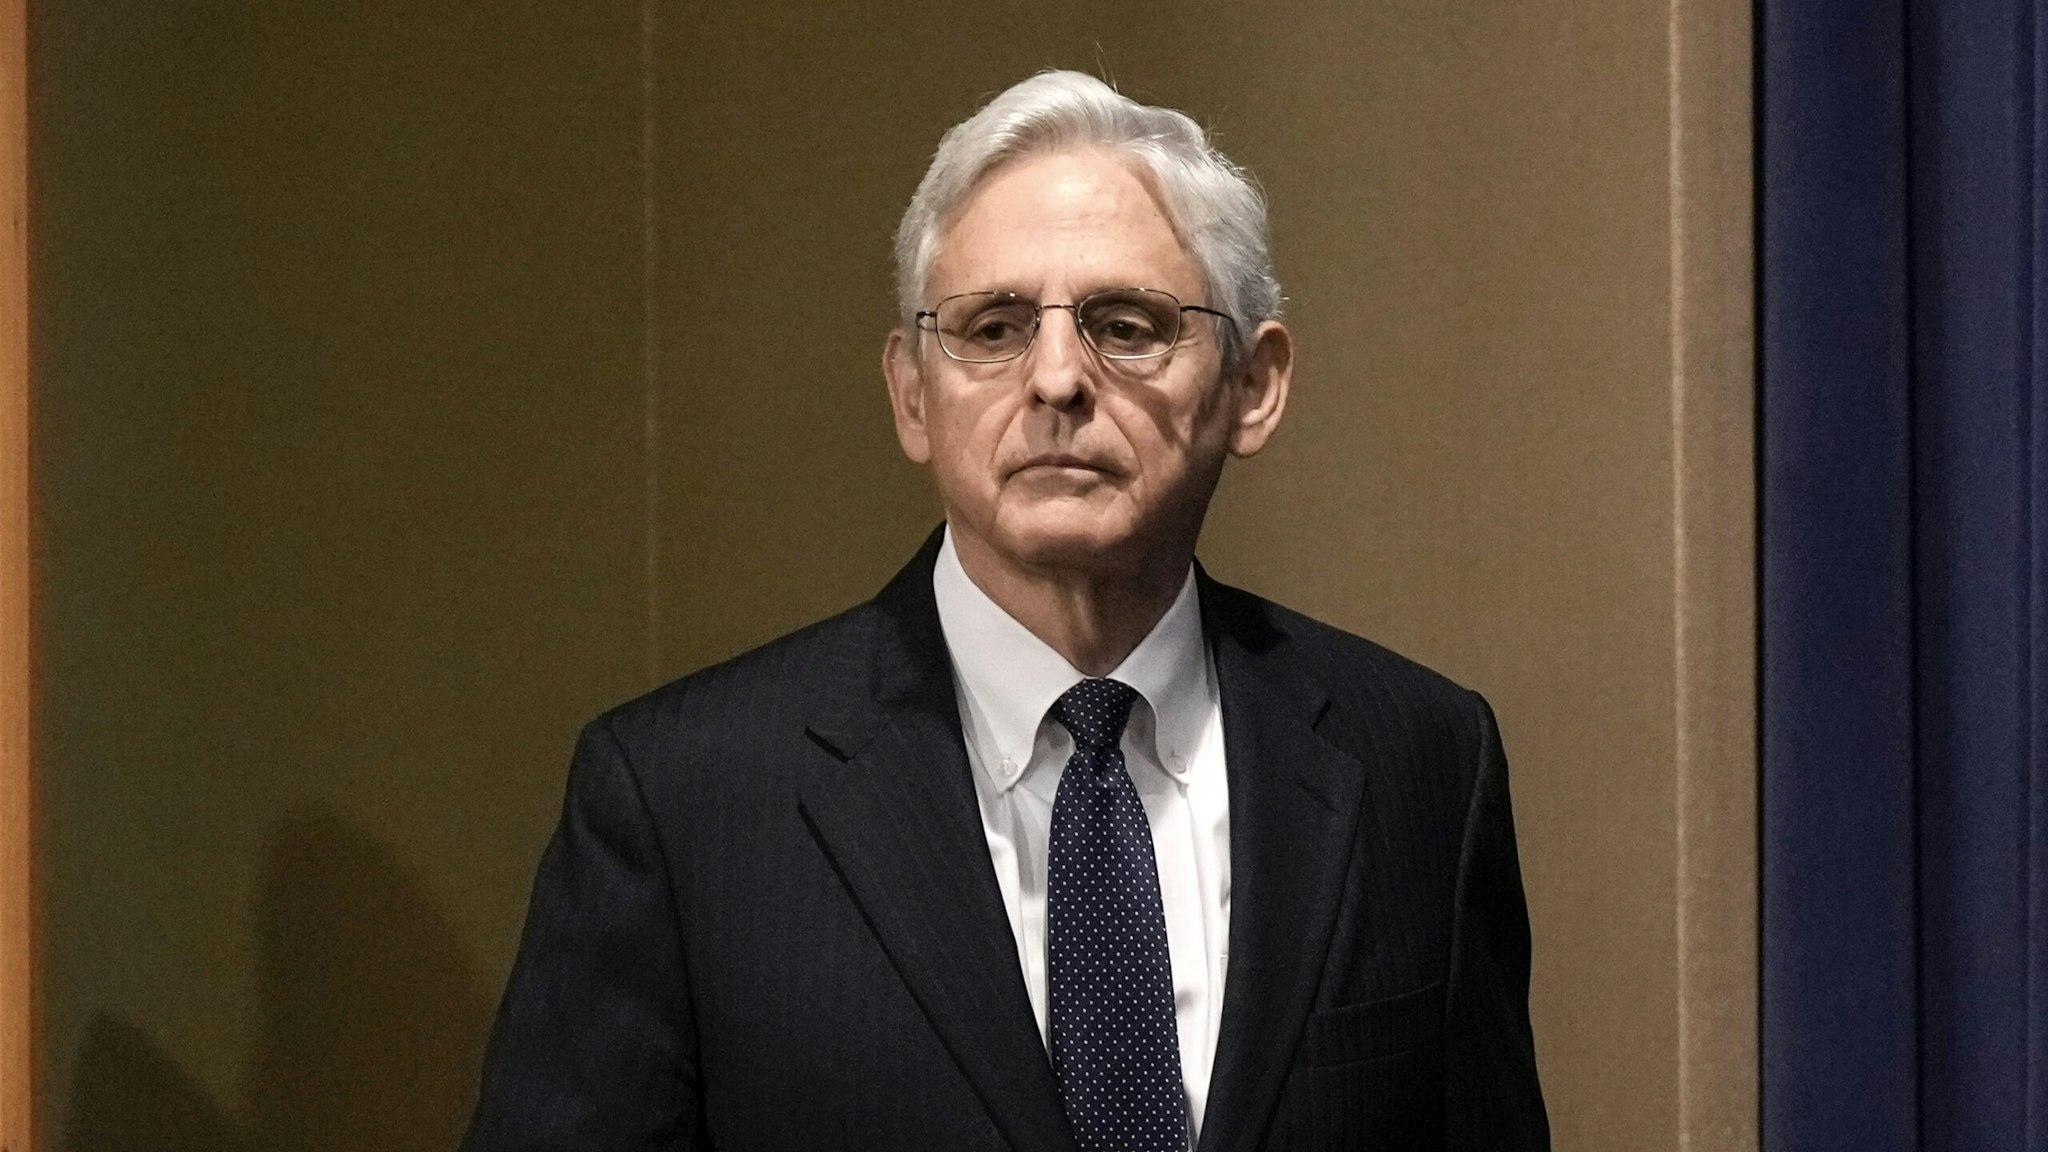 WASHINGTON, DC - AUGUST 11: U.S. Attorney General Merrick Garland arrives to deliver a statement at the U.S. Department of Justice August 11, 2022 in Washington, DC. Garland addressed the FBI's recent search of former President Donald Trump's Mar-a-Lago residence, announcing the Justice Department has filed a motion to unseal the search warrant as well as a property receipt for what was taken.